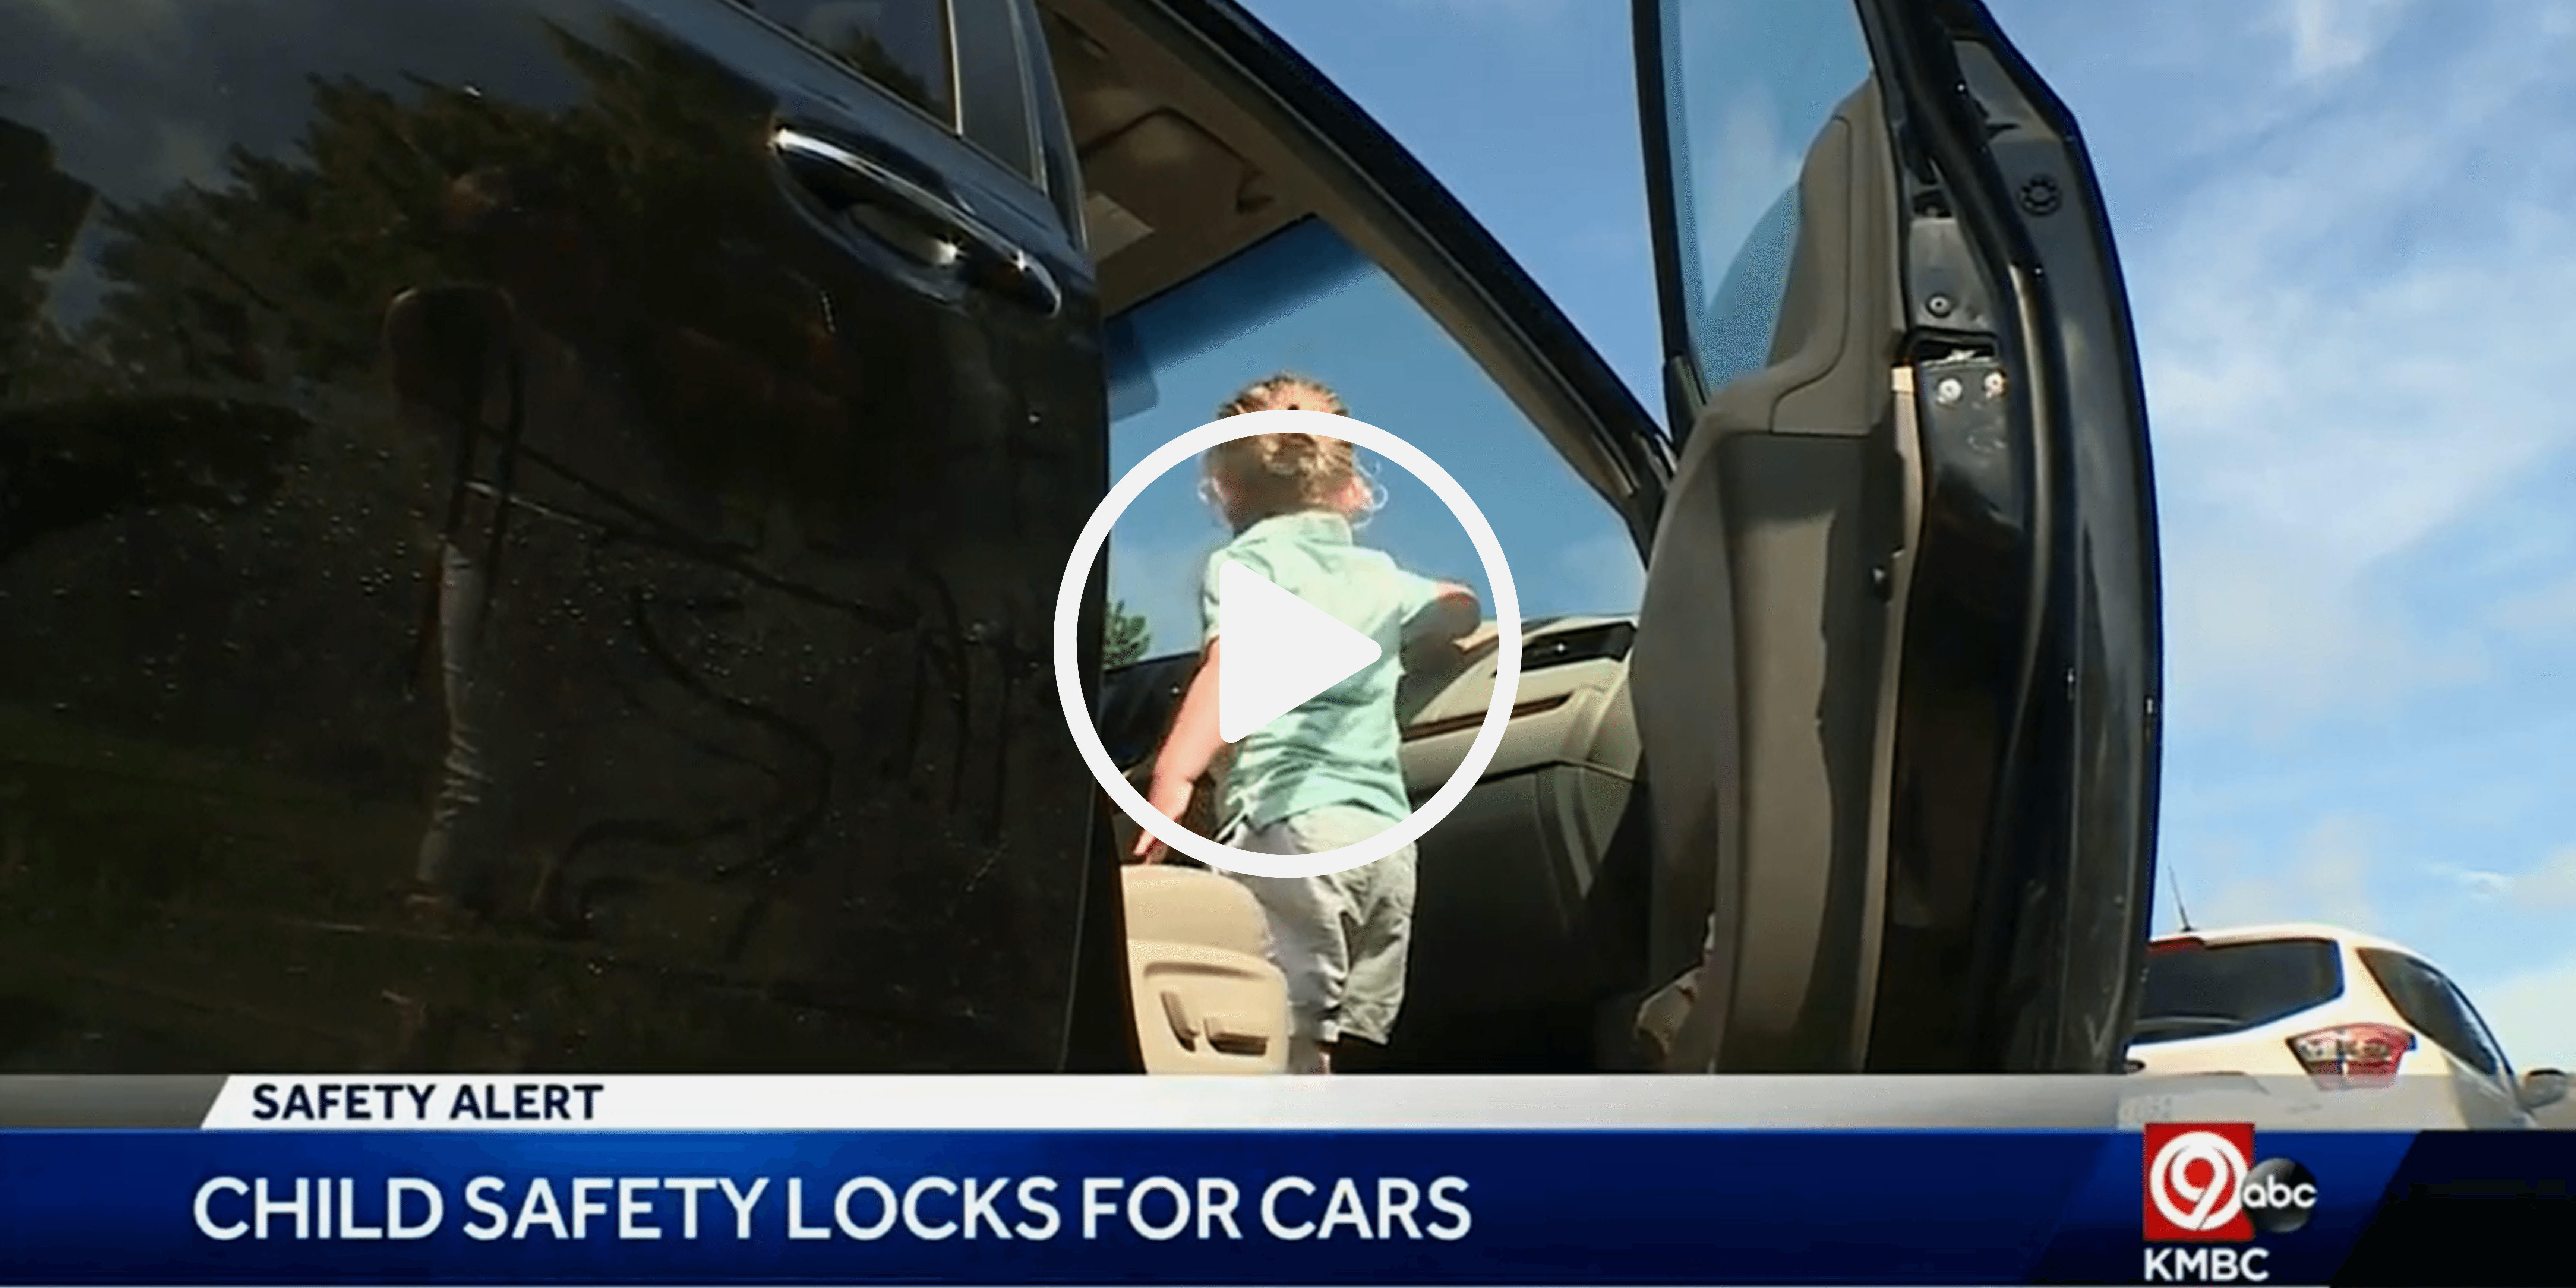 Is your child safe when using vehicle child safety locks?